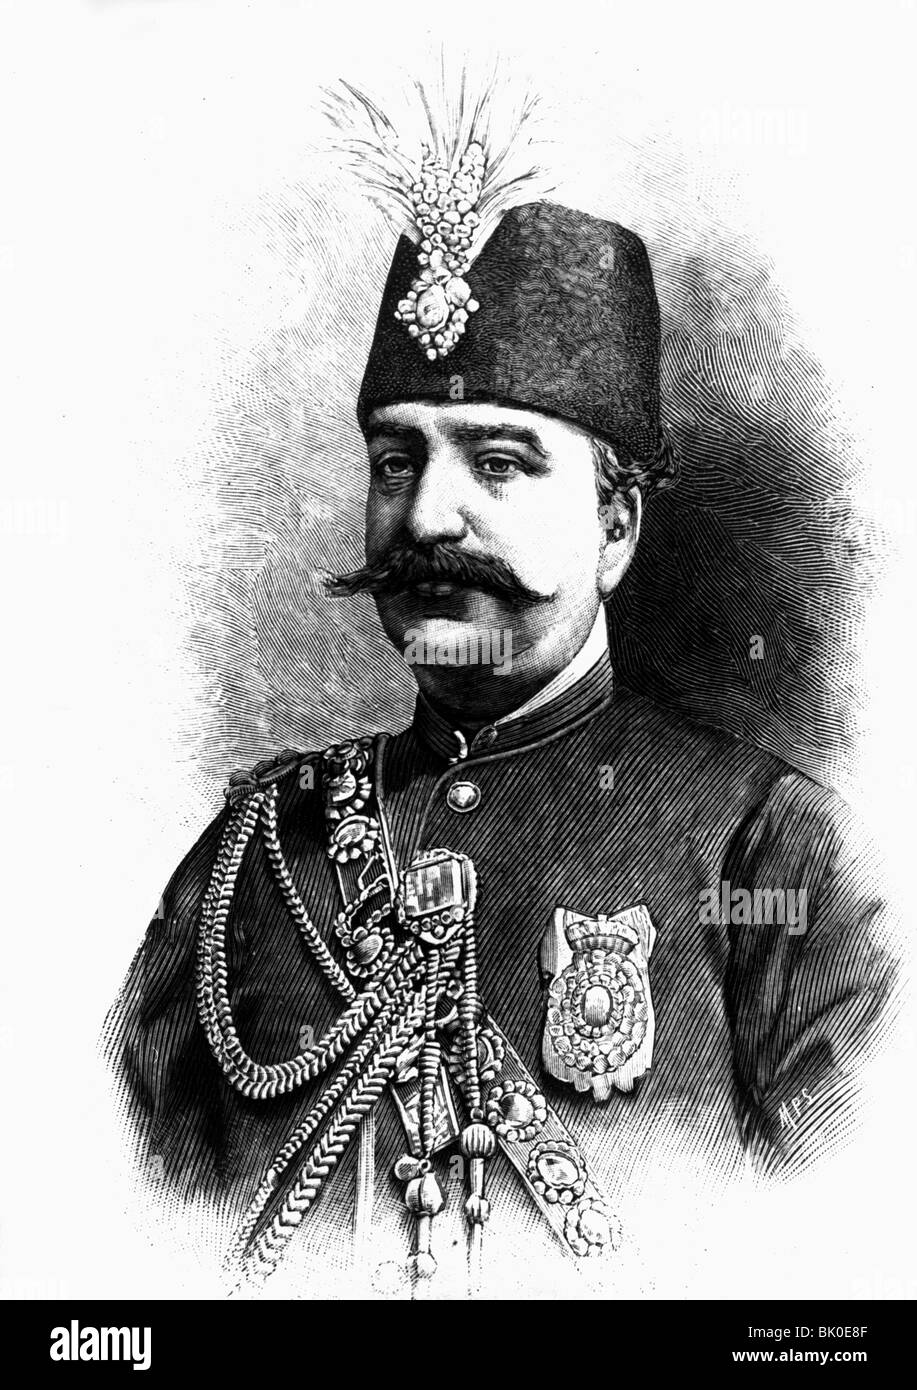 Naser al-Din, 16.7.1831 - 1.5.1896, Shah of Persia 17.9.1848 - 1.5.1896, portrait, wood engraving, 19th century, , Stock Photo